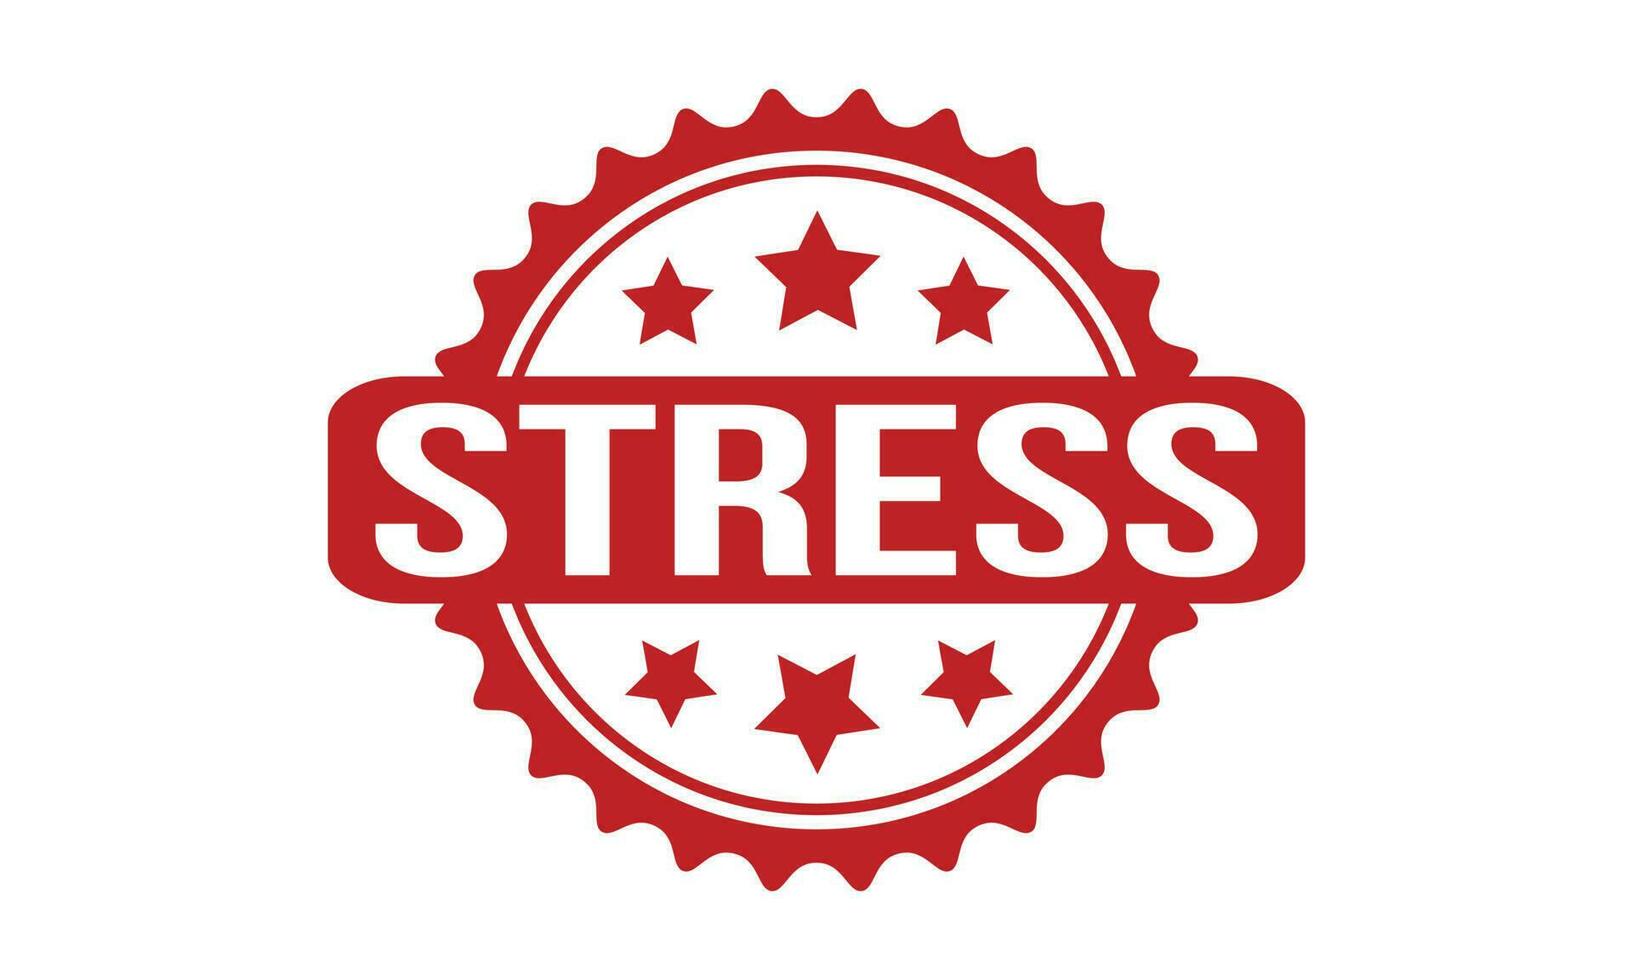 Stress Rubber Stamp Seal Vector